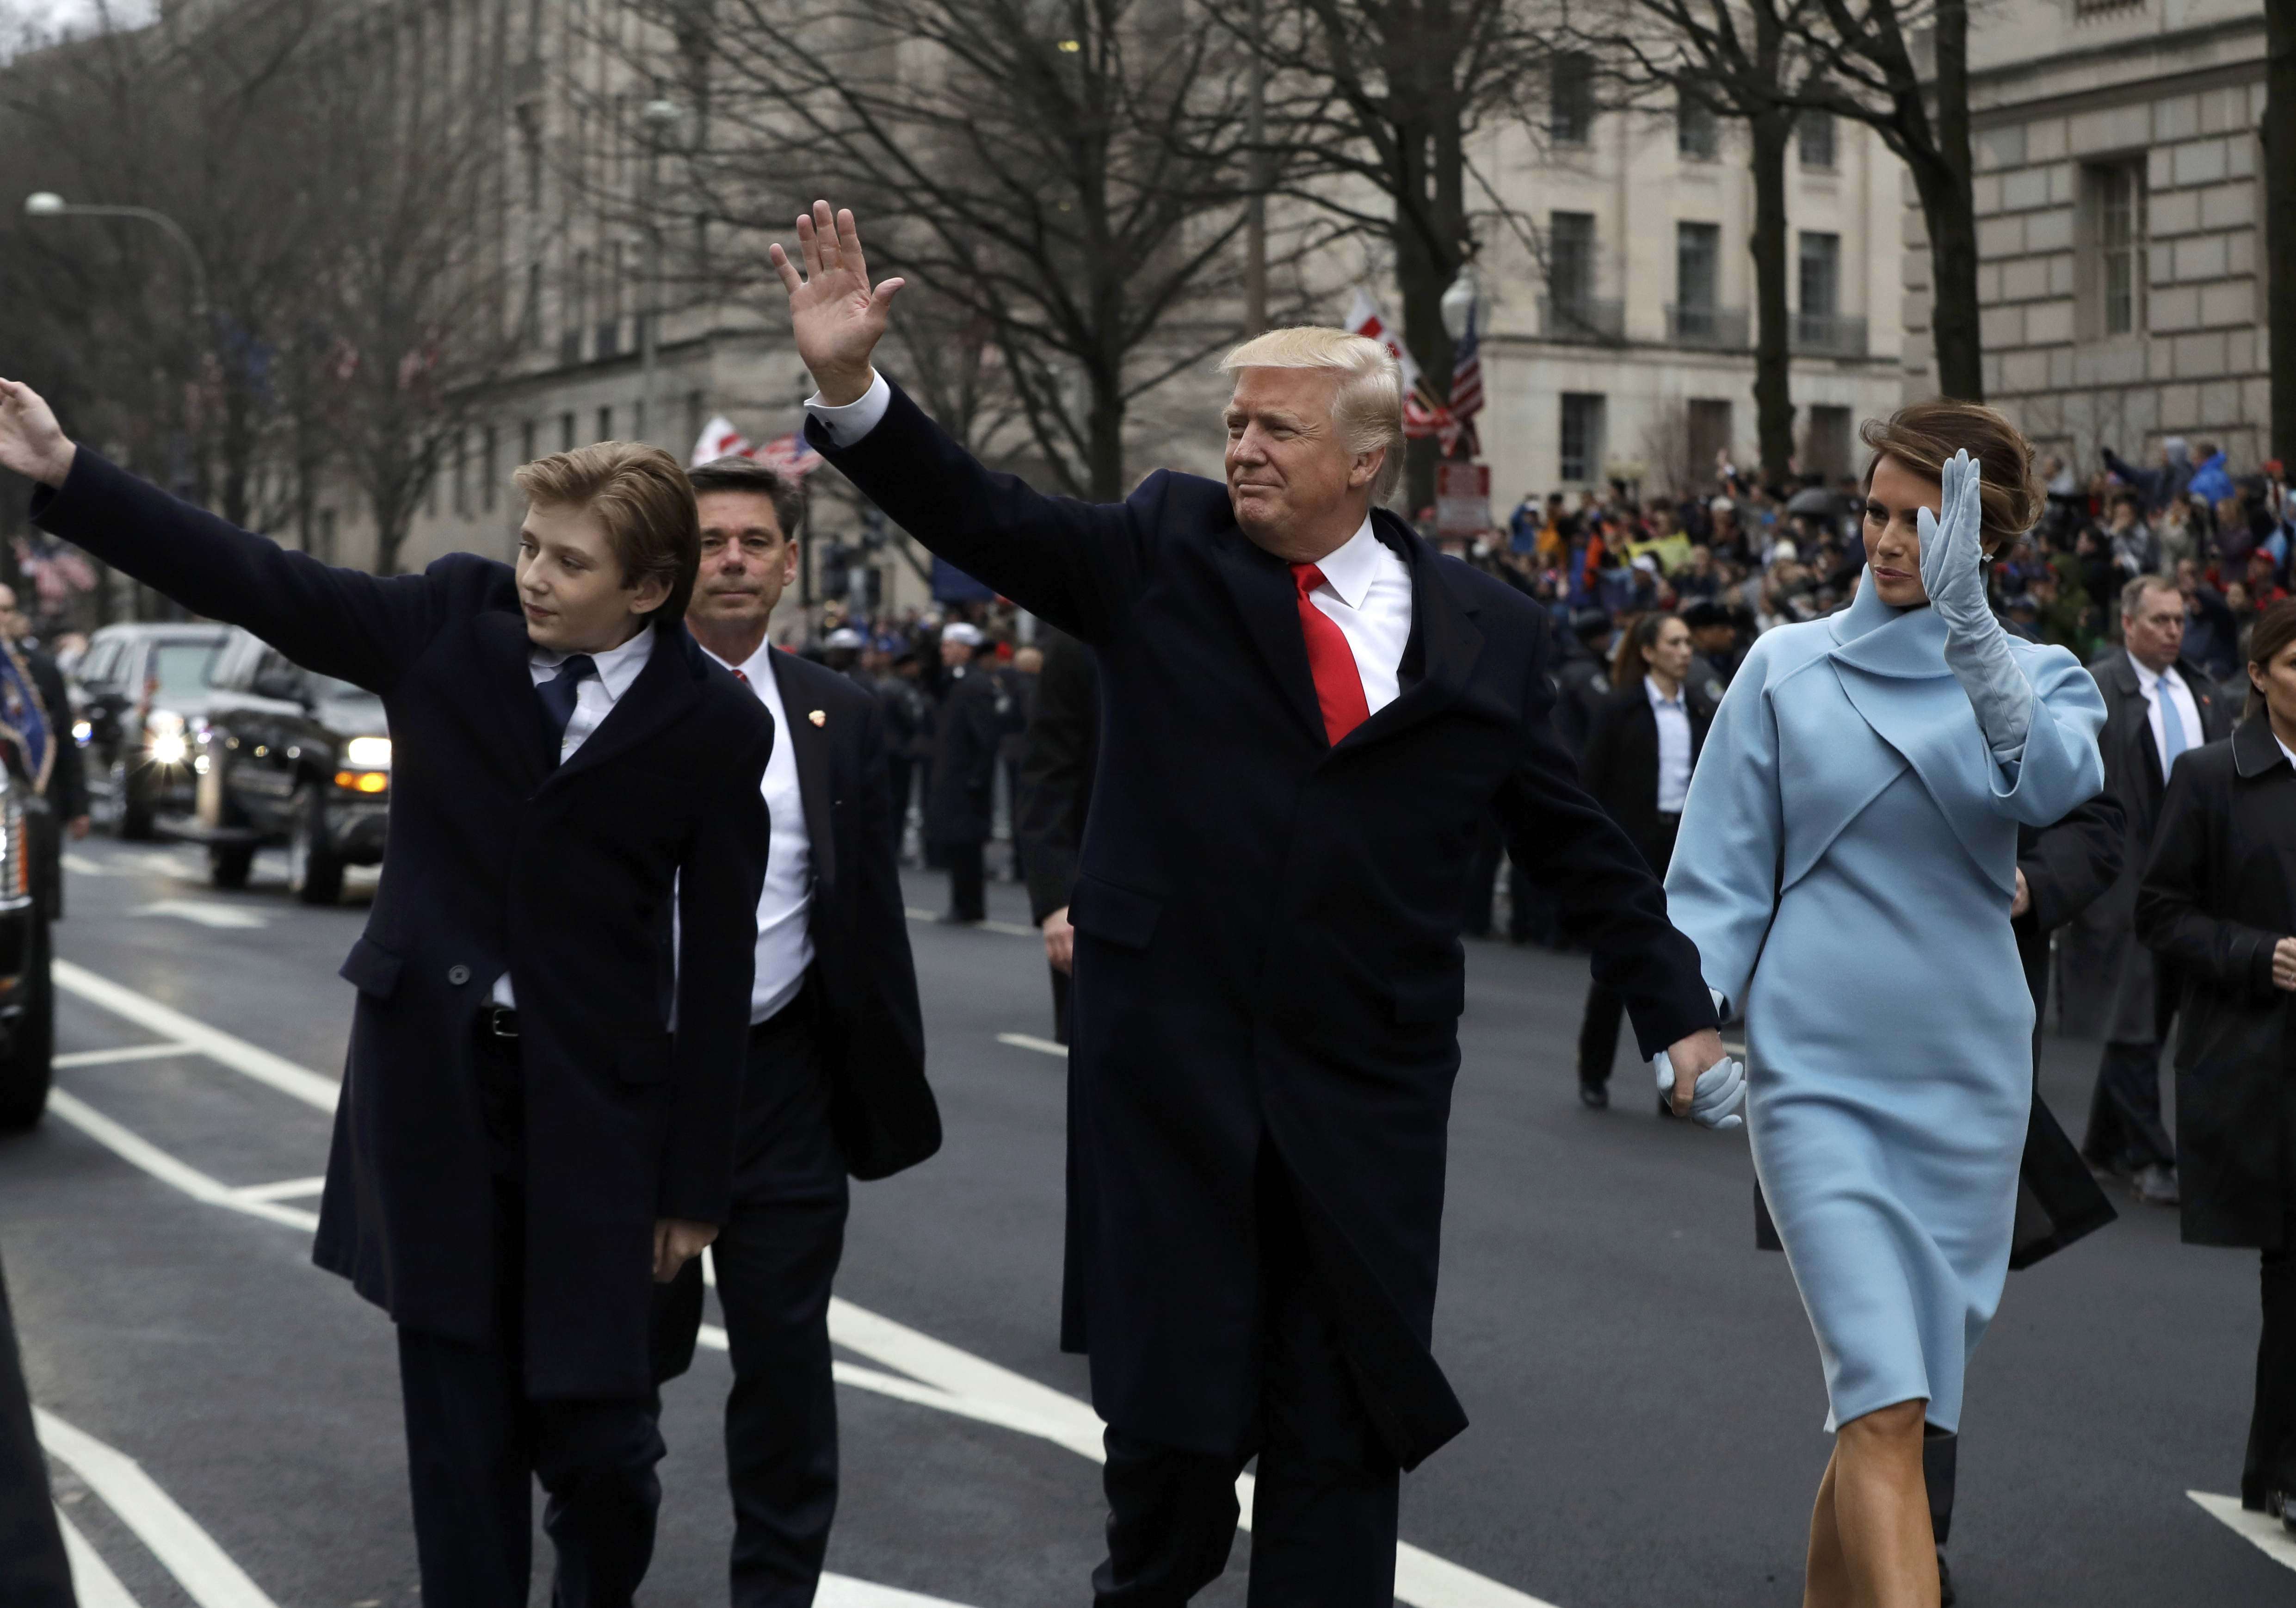 US President Donald Trump waves as he walks with first lady Melania Trump and their son Barron, left, during the inauguration parade on Pennsylvania Avenue in Washington DC. Photo: Reuters